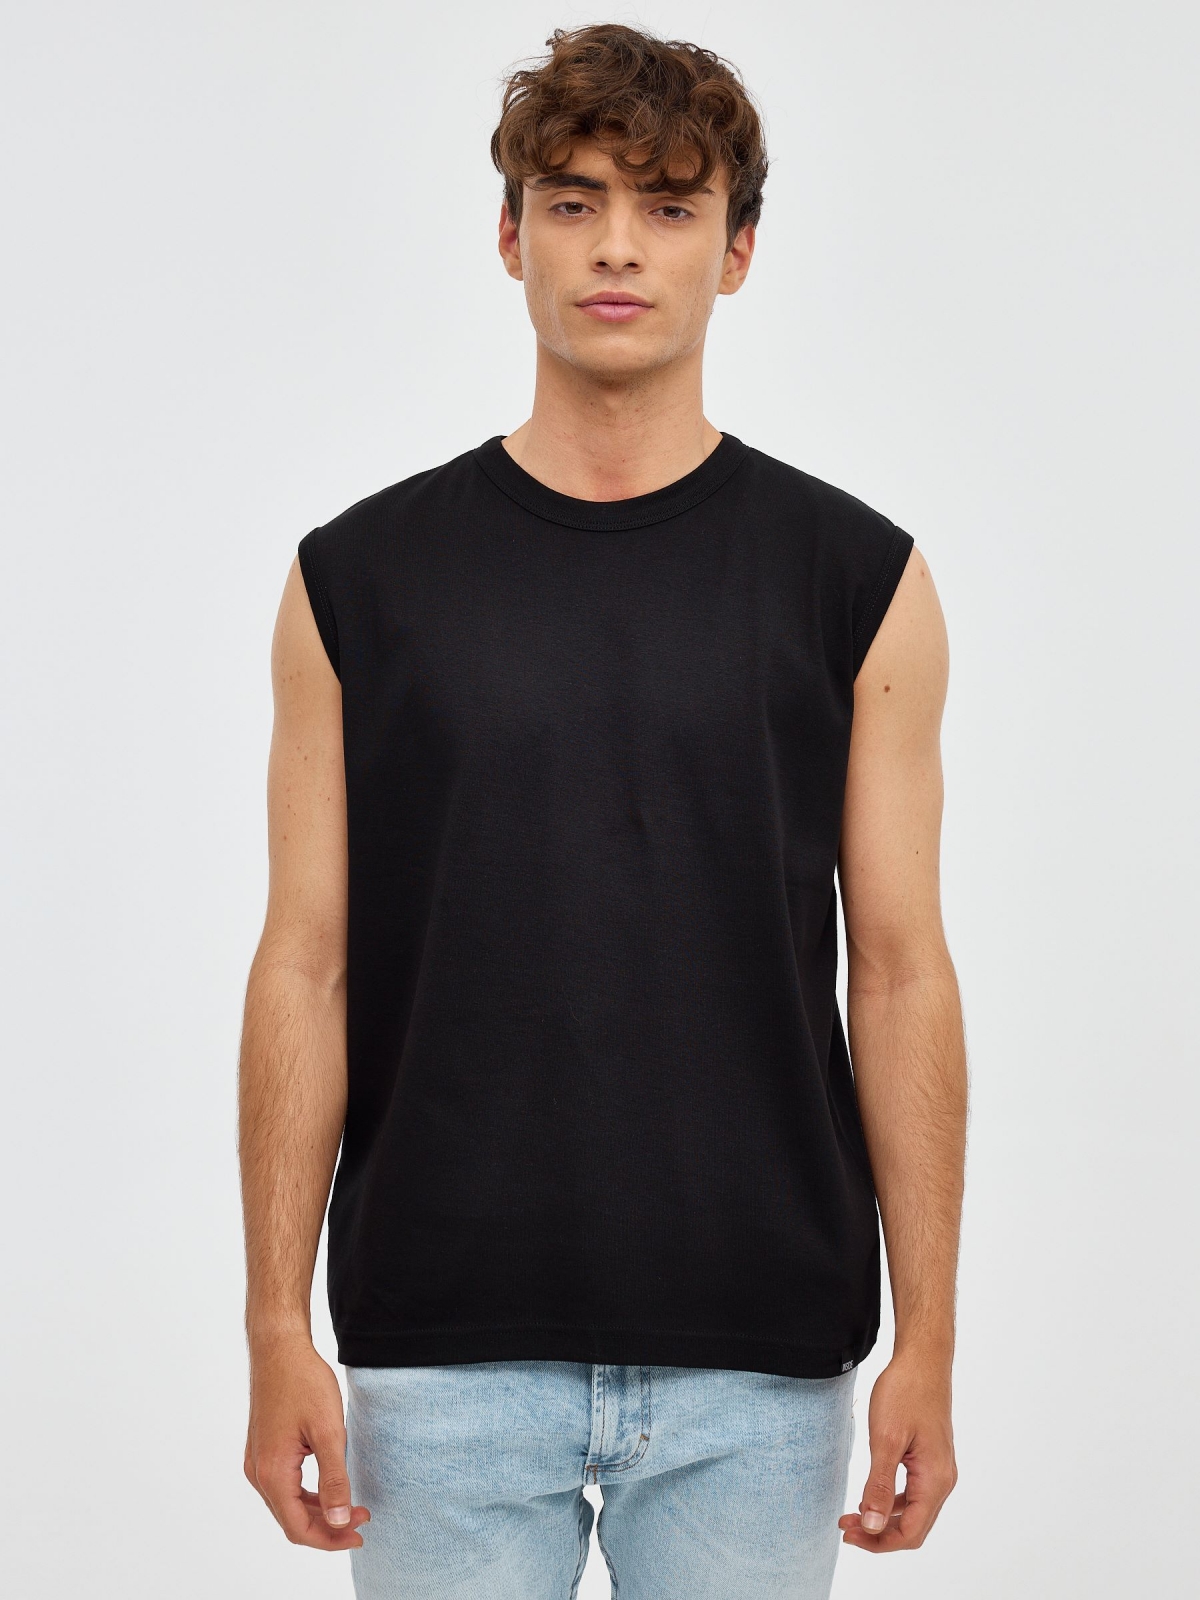 Basic sleeveless t-shirt black middle front view